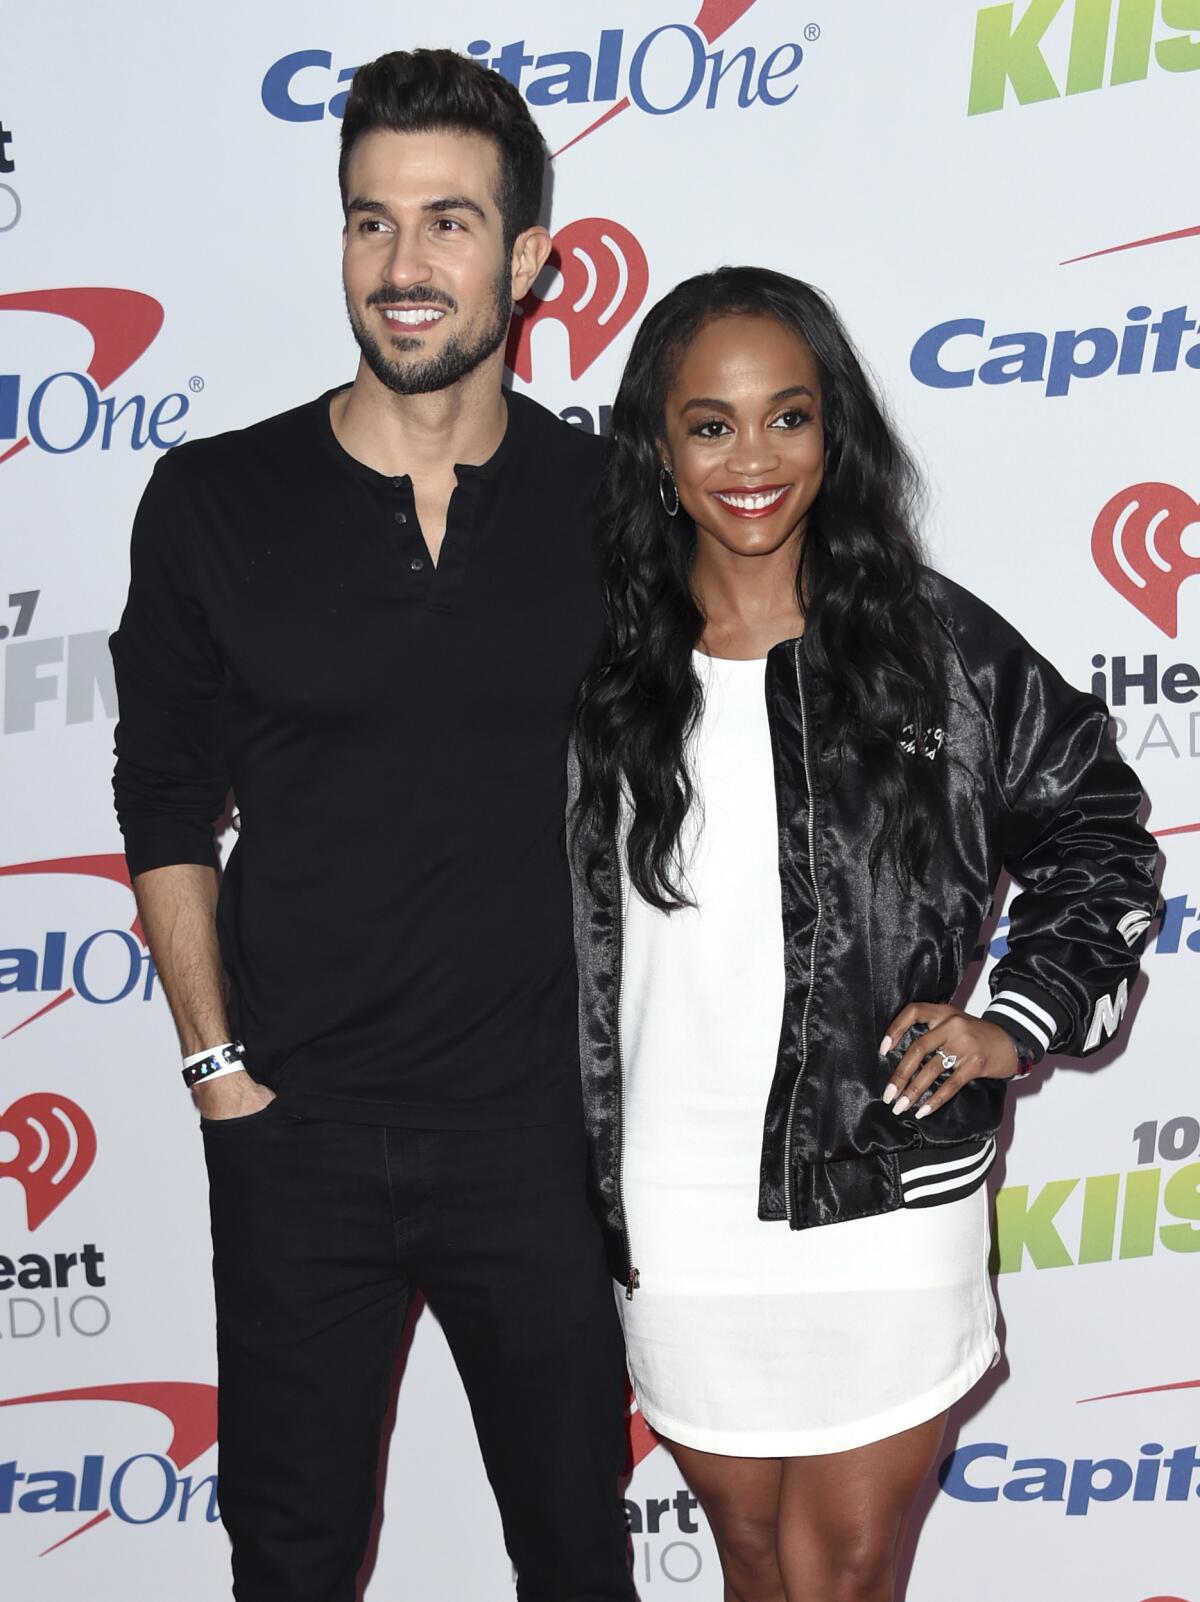 Bryan Abasolo and Rachel Lindsay pose together, smiling, each with an arm around the other. 